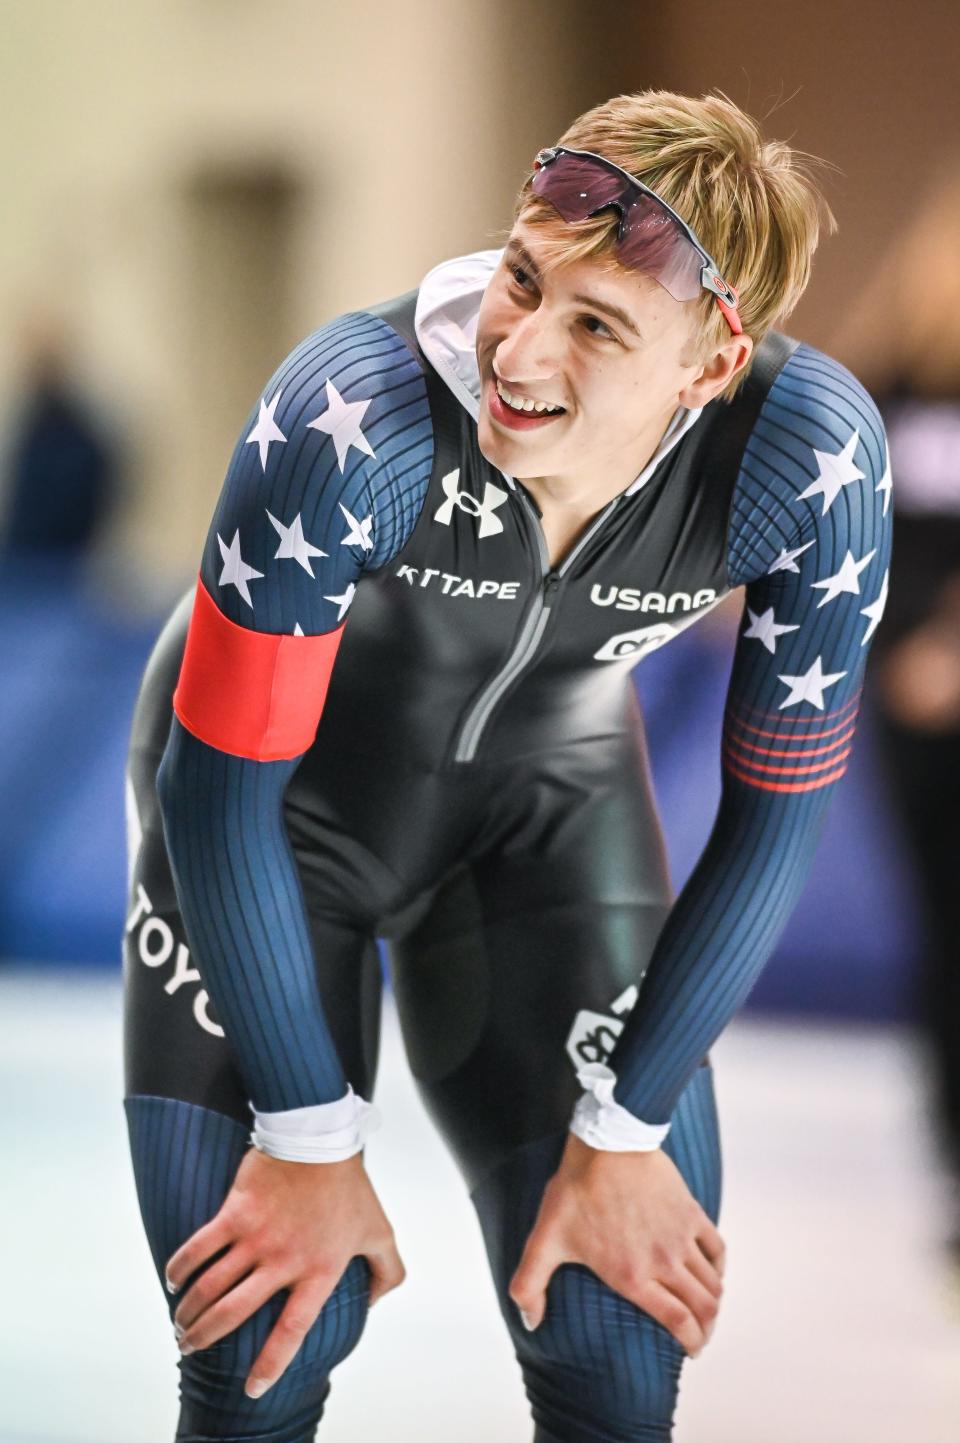 Jordan Stolz cools down after racing in the 1,500 meters during the U.S. long-track speed skating championships Friday, October 27, 2023, at the Pettit National Ice Center in Milwaukee, Wisconsin.